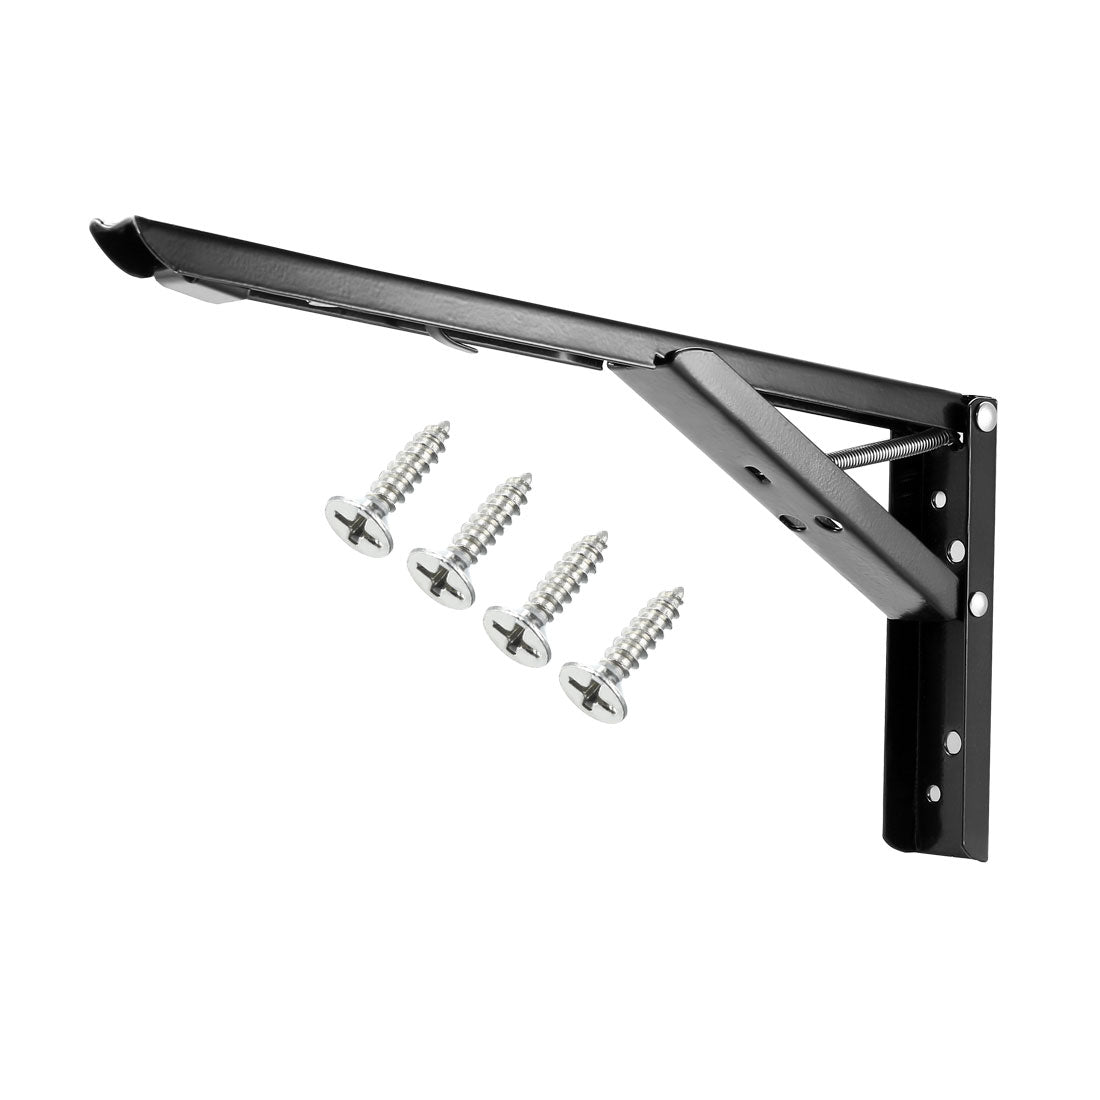 uxcell Uxcell Folding Bracket 11.6 inch 295mm for Shelves Table Desk Wall Mounted Support Collapsible Long Release Arm Space Saving Carbon Steel